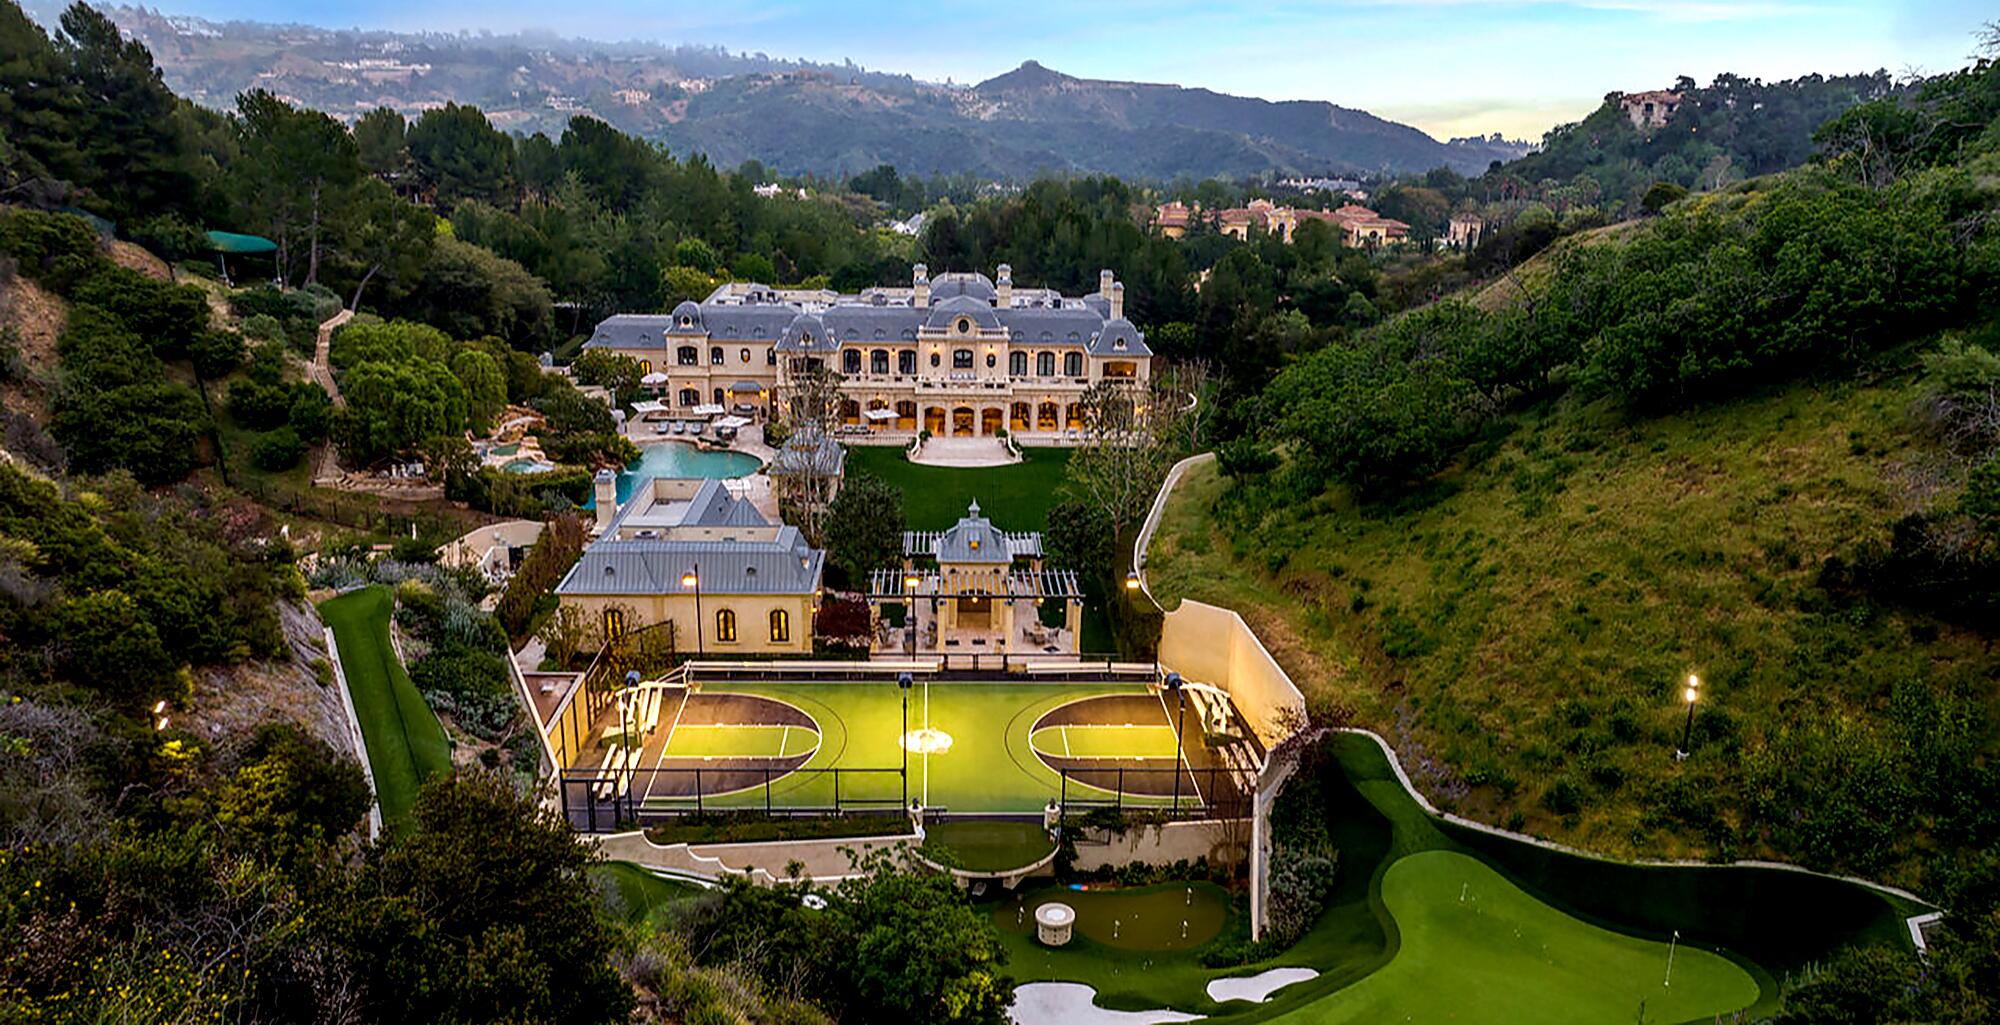 Mark Wahlberg's Beverly Park mega-mansion with basketball court, surrounded by green hills.